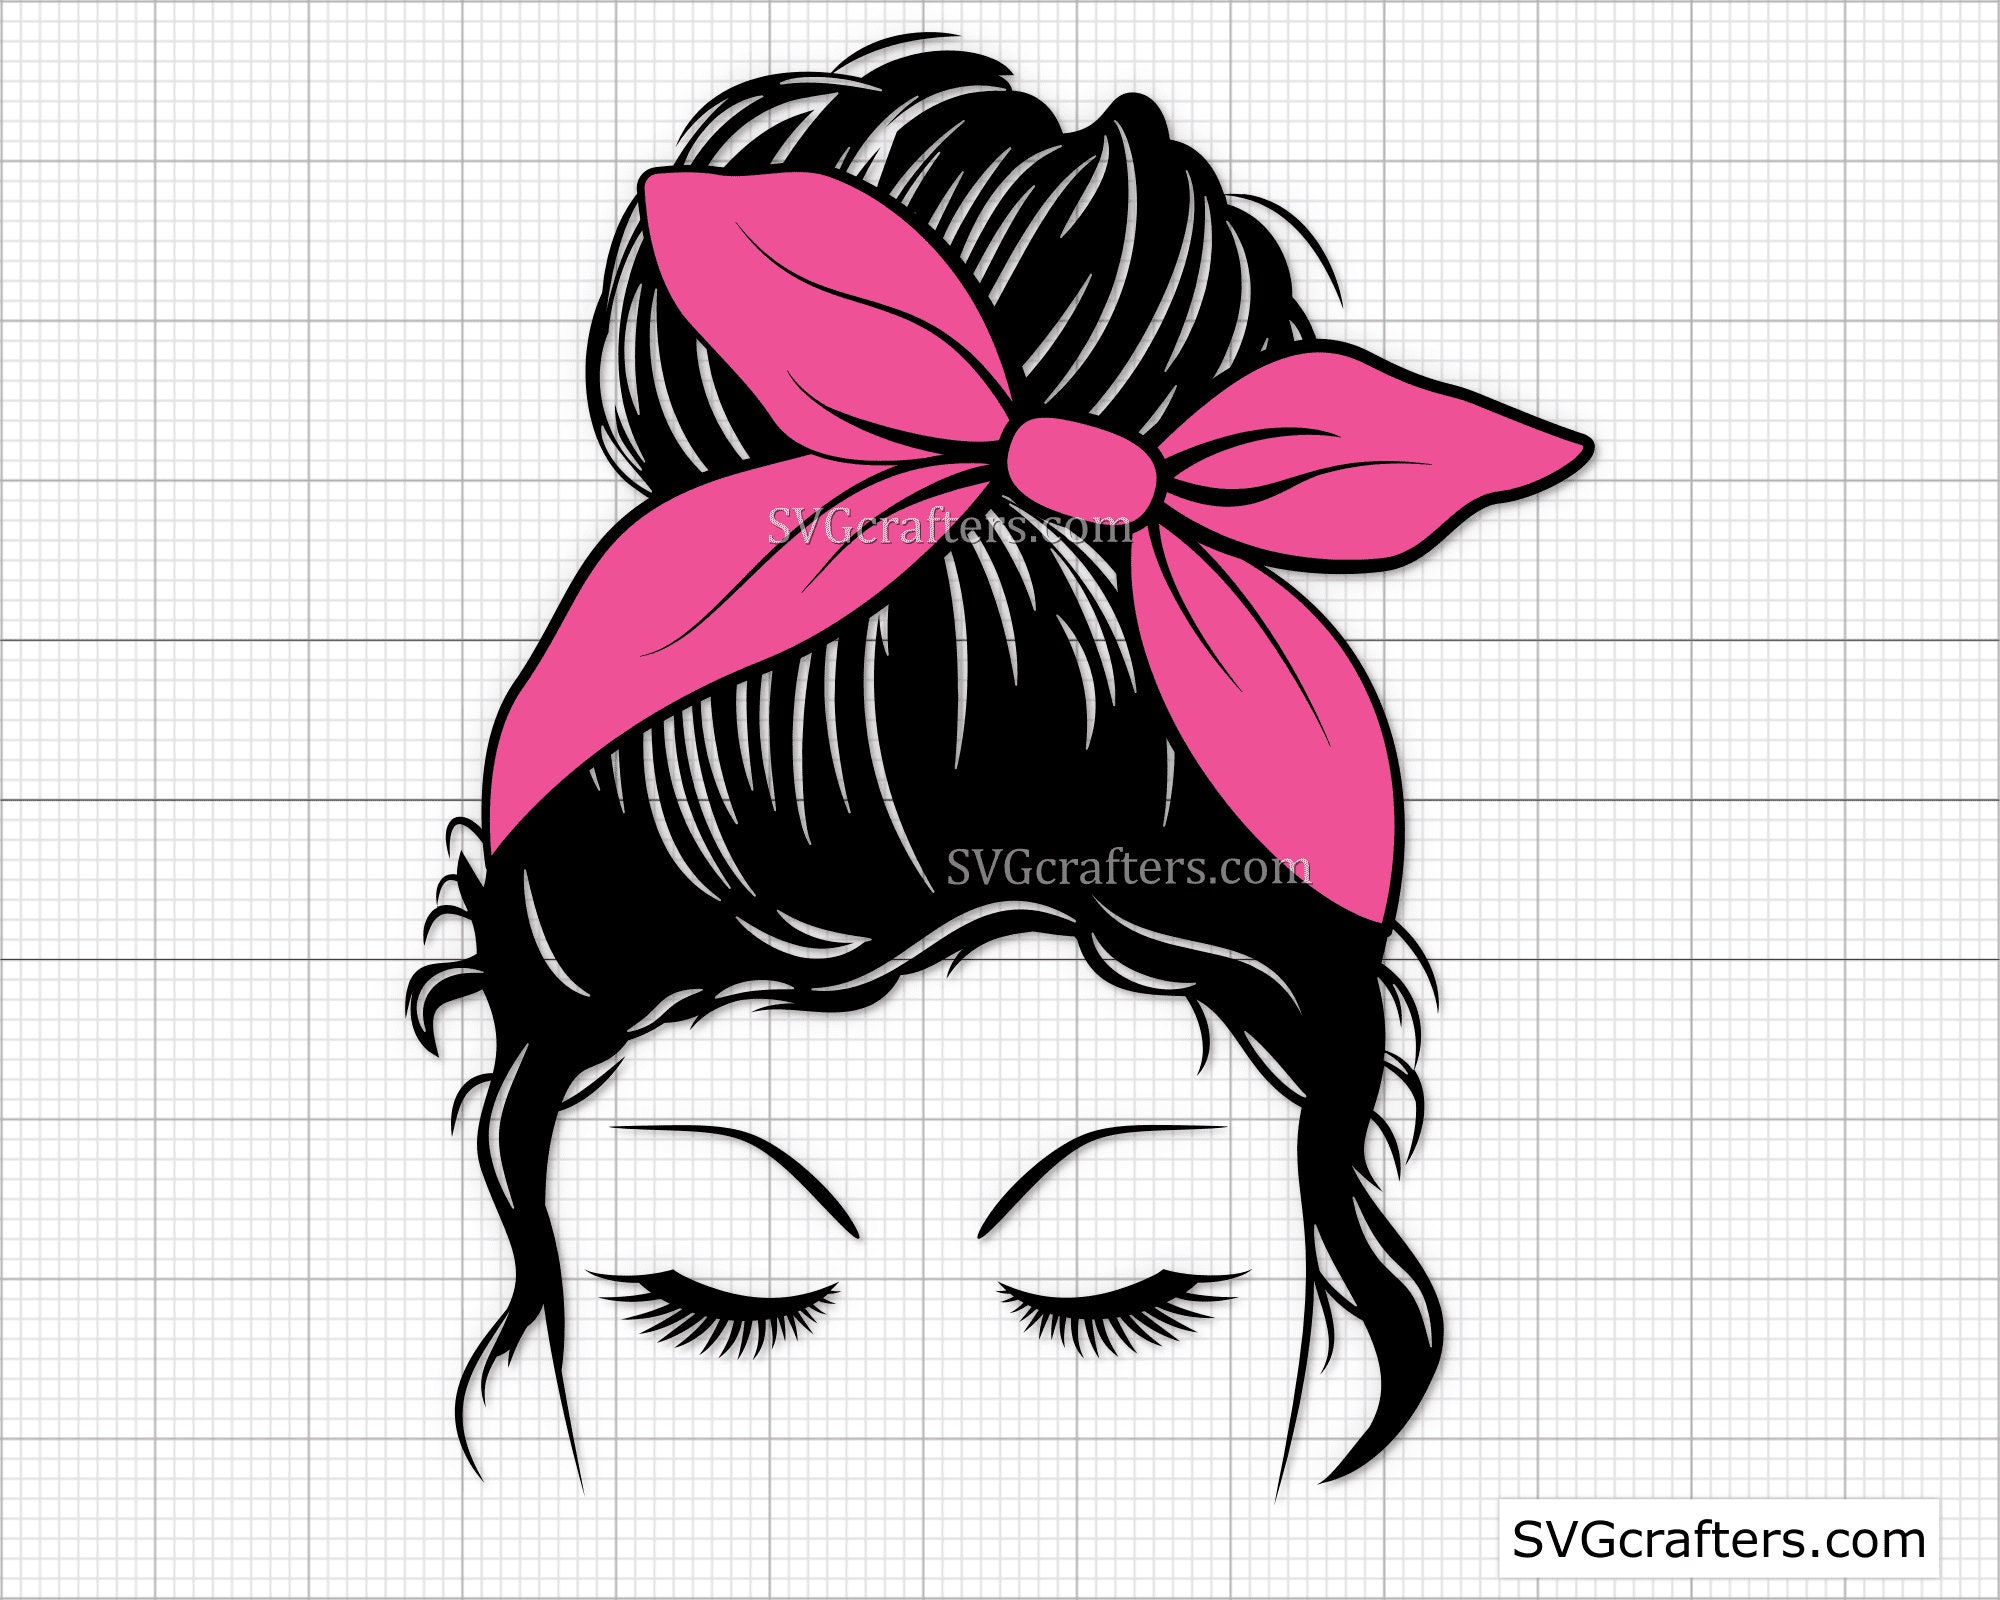 Messy Hair Bun Mom Life PNG sublimation downloads - LV Life PNG - Pink LV